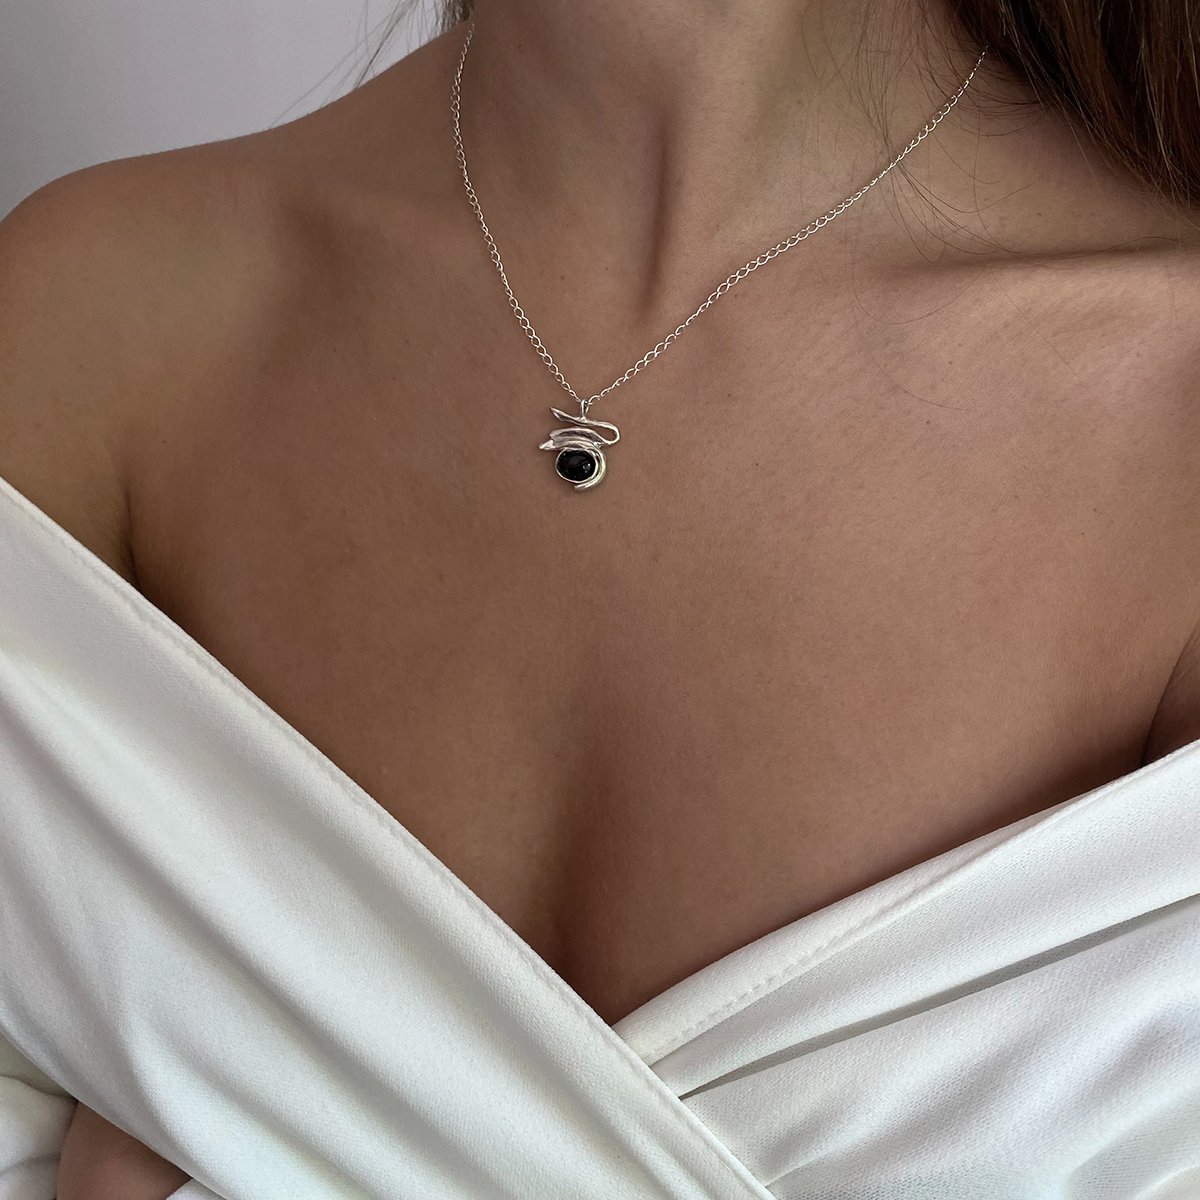 The Gloriosa necklace is a handmade piece made of 925 silver. It has a smooth and polished surface and includes semi-precious stones in three different colors (white, green, black). The length of the chain in the photo is 40 cm.